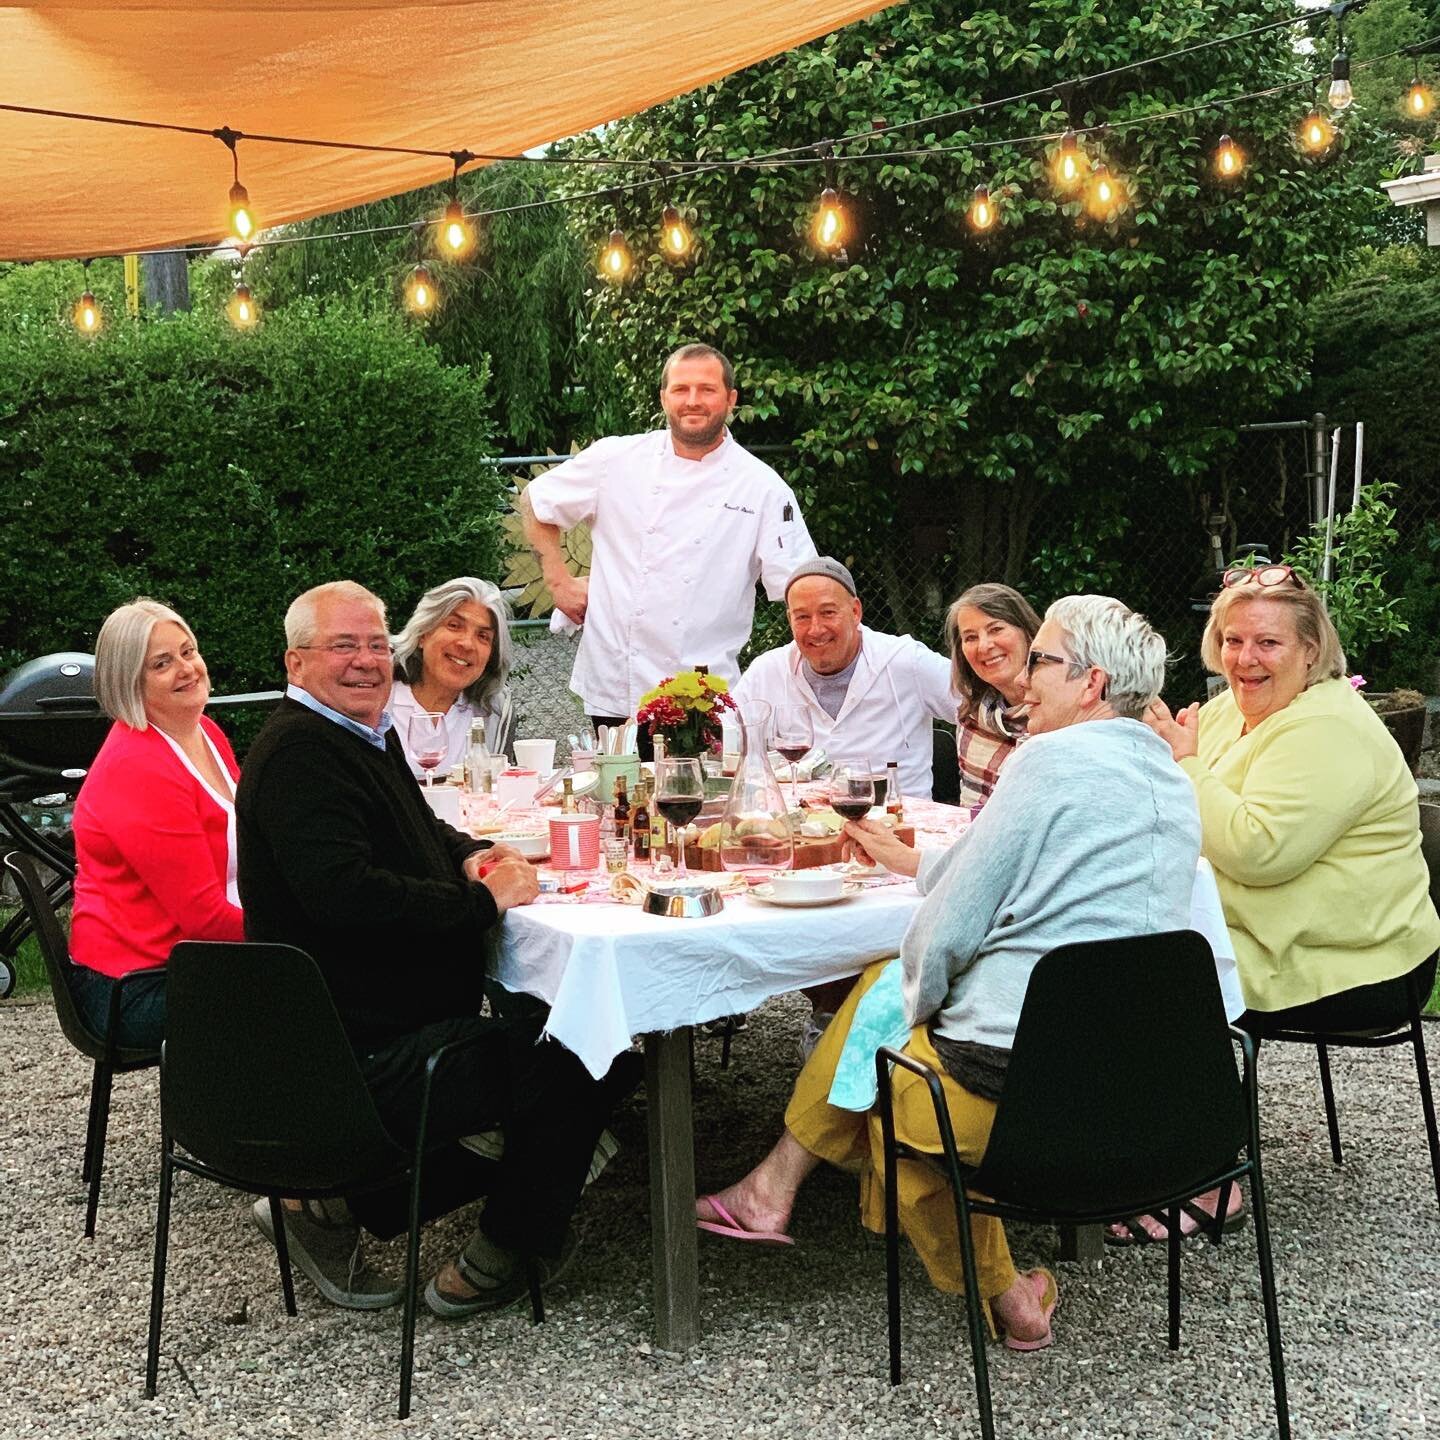 What a fun Dinner party. So excited to cater a wedding with these fine people soon!

#catering 
#seattlecatering 
#seattle 
#seattlechef 
#eater 
#dinner 
#elcentro